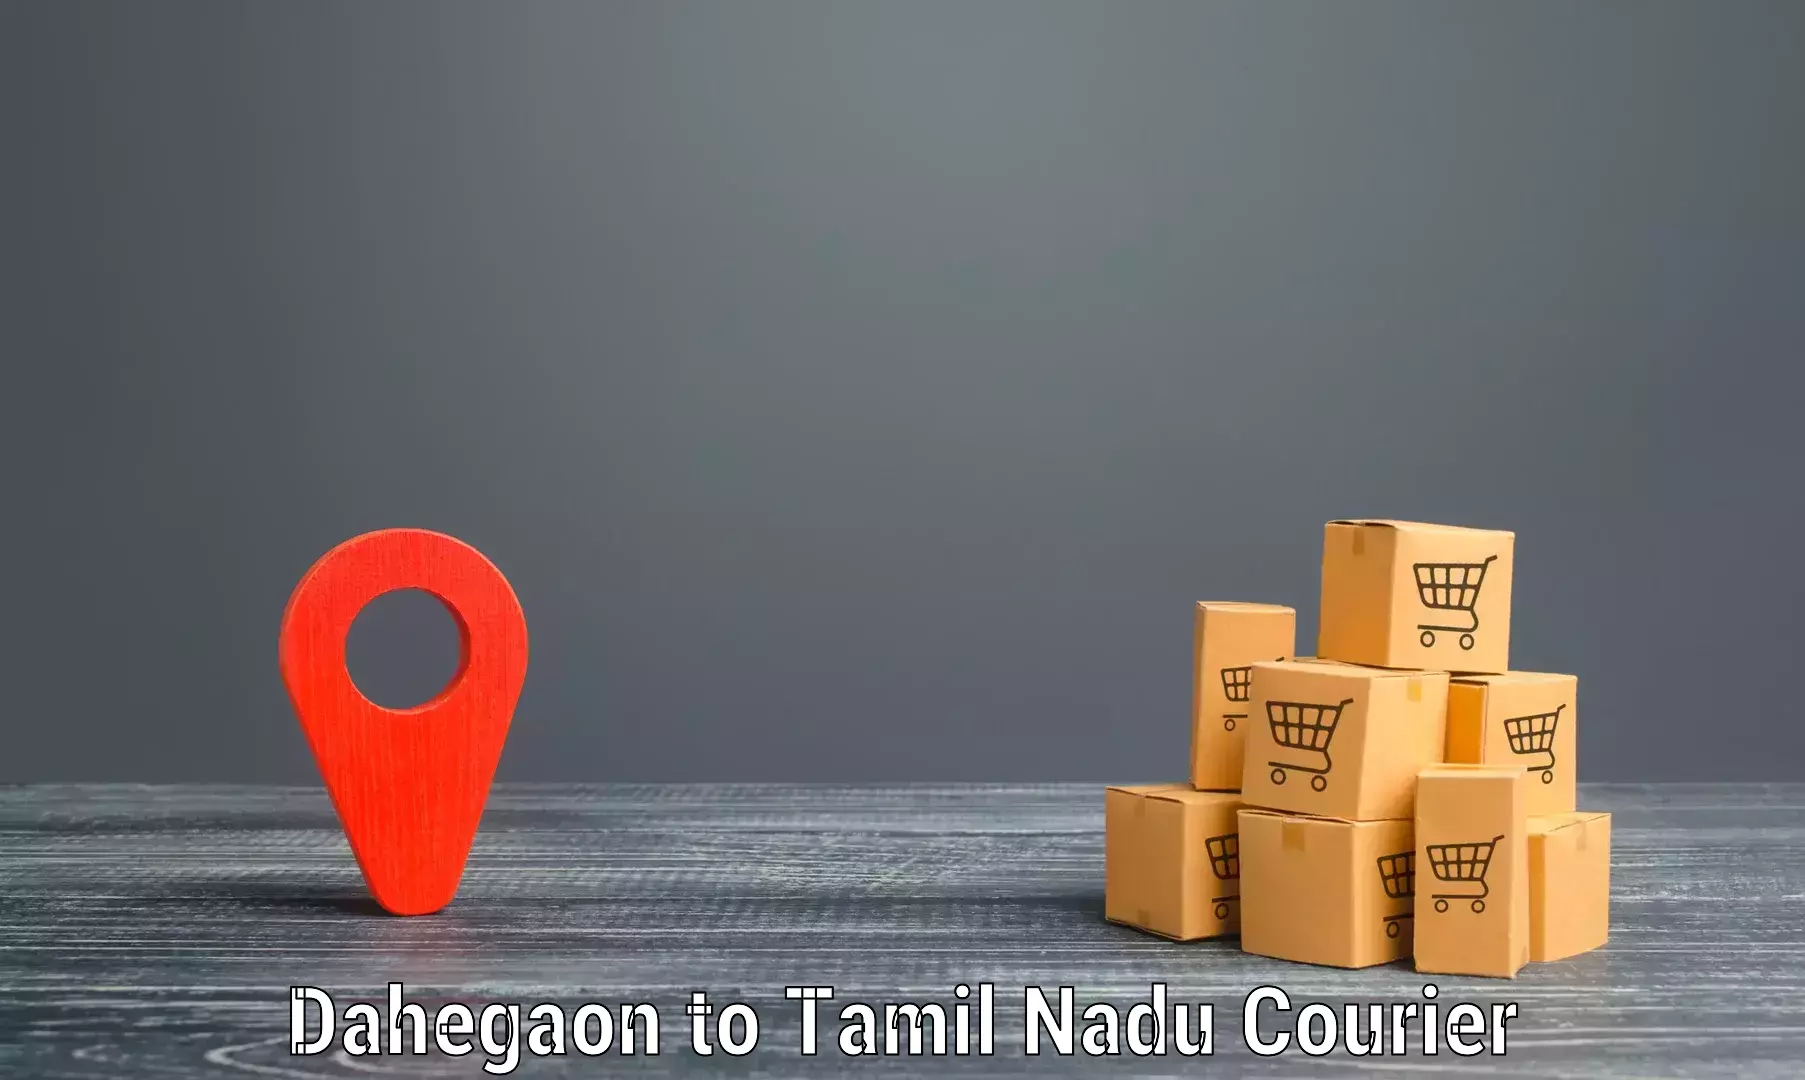 State-of-the-art courier technology Dahegaon to Pennagaram